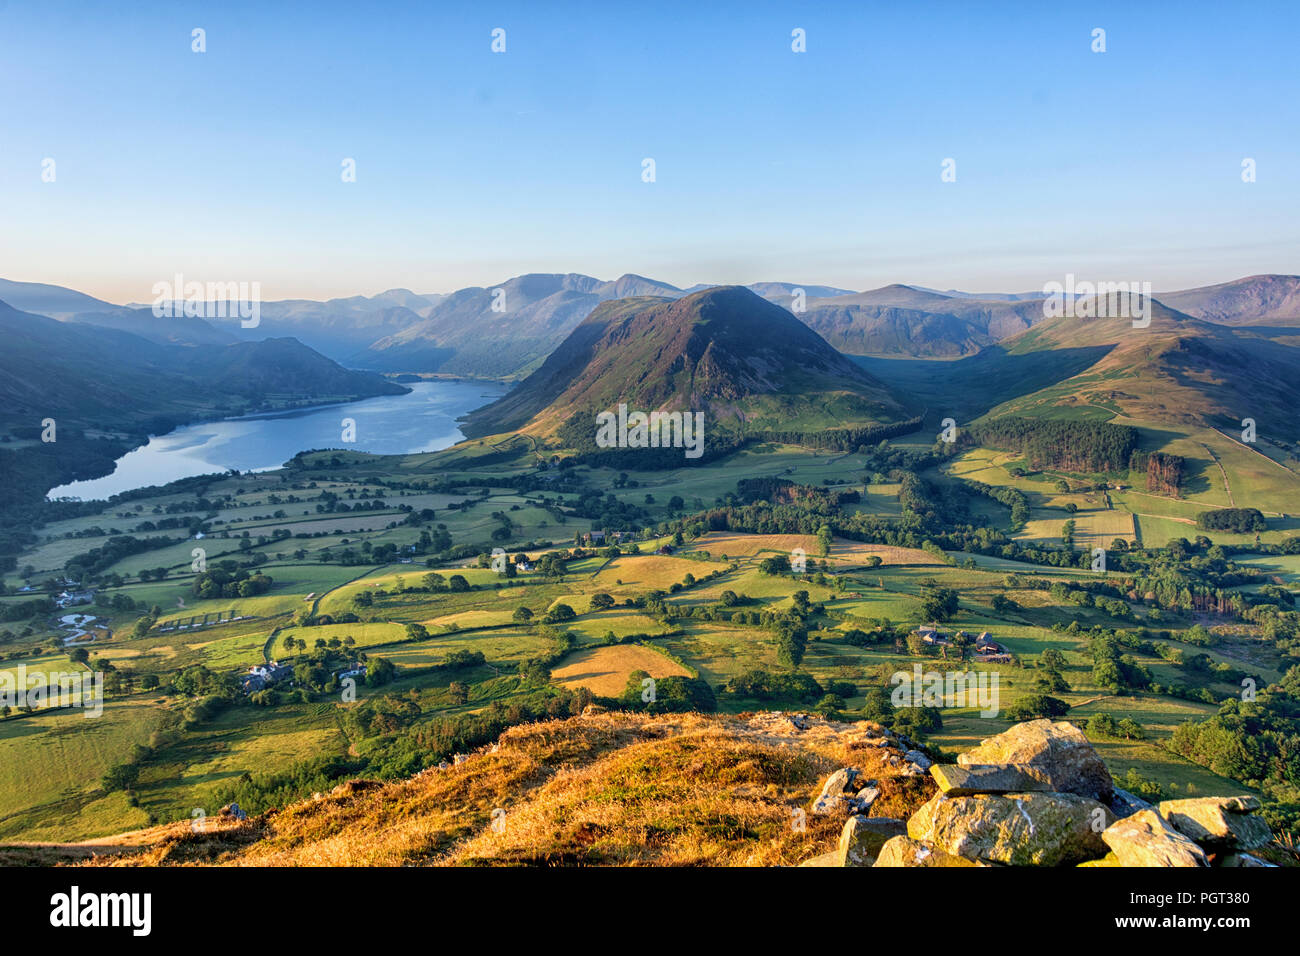 Sunrise over Crummock Water with Mellbreak fell, from Low fell, Buttermere, Lake District, Cumbria, England, UK Stock Photo